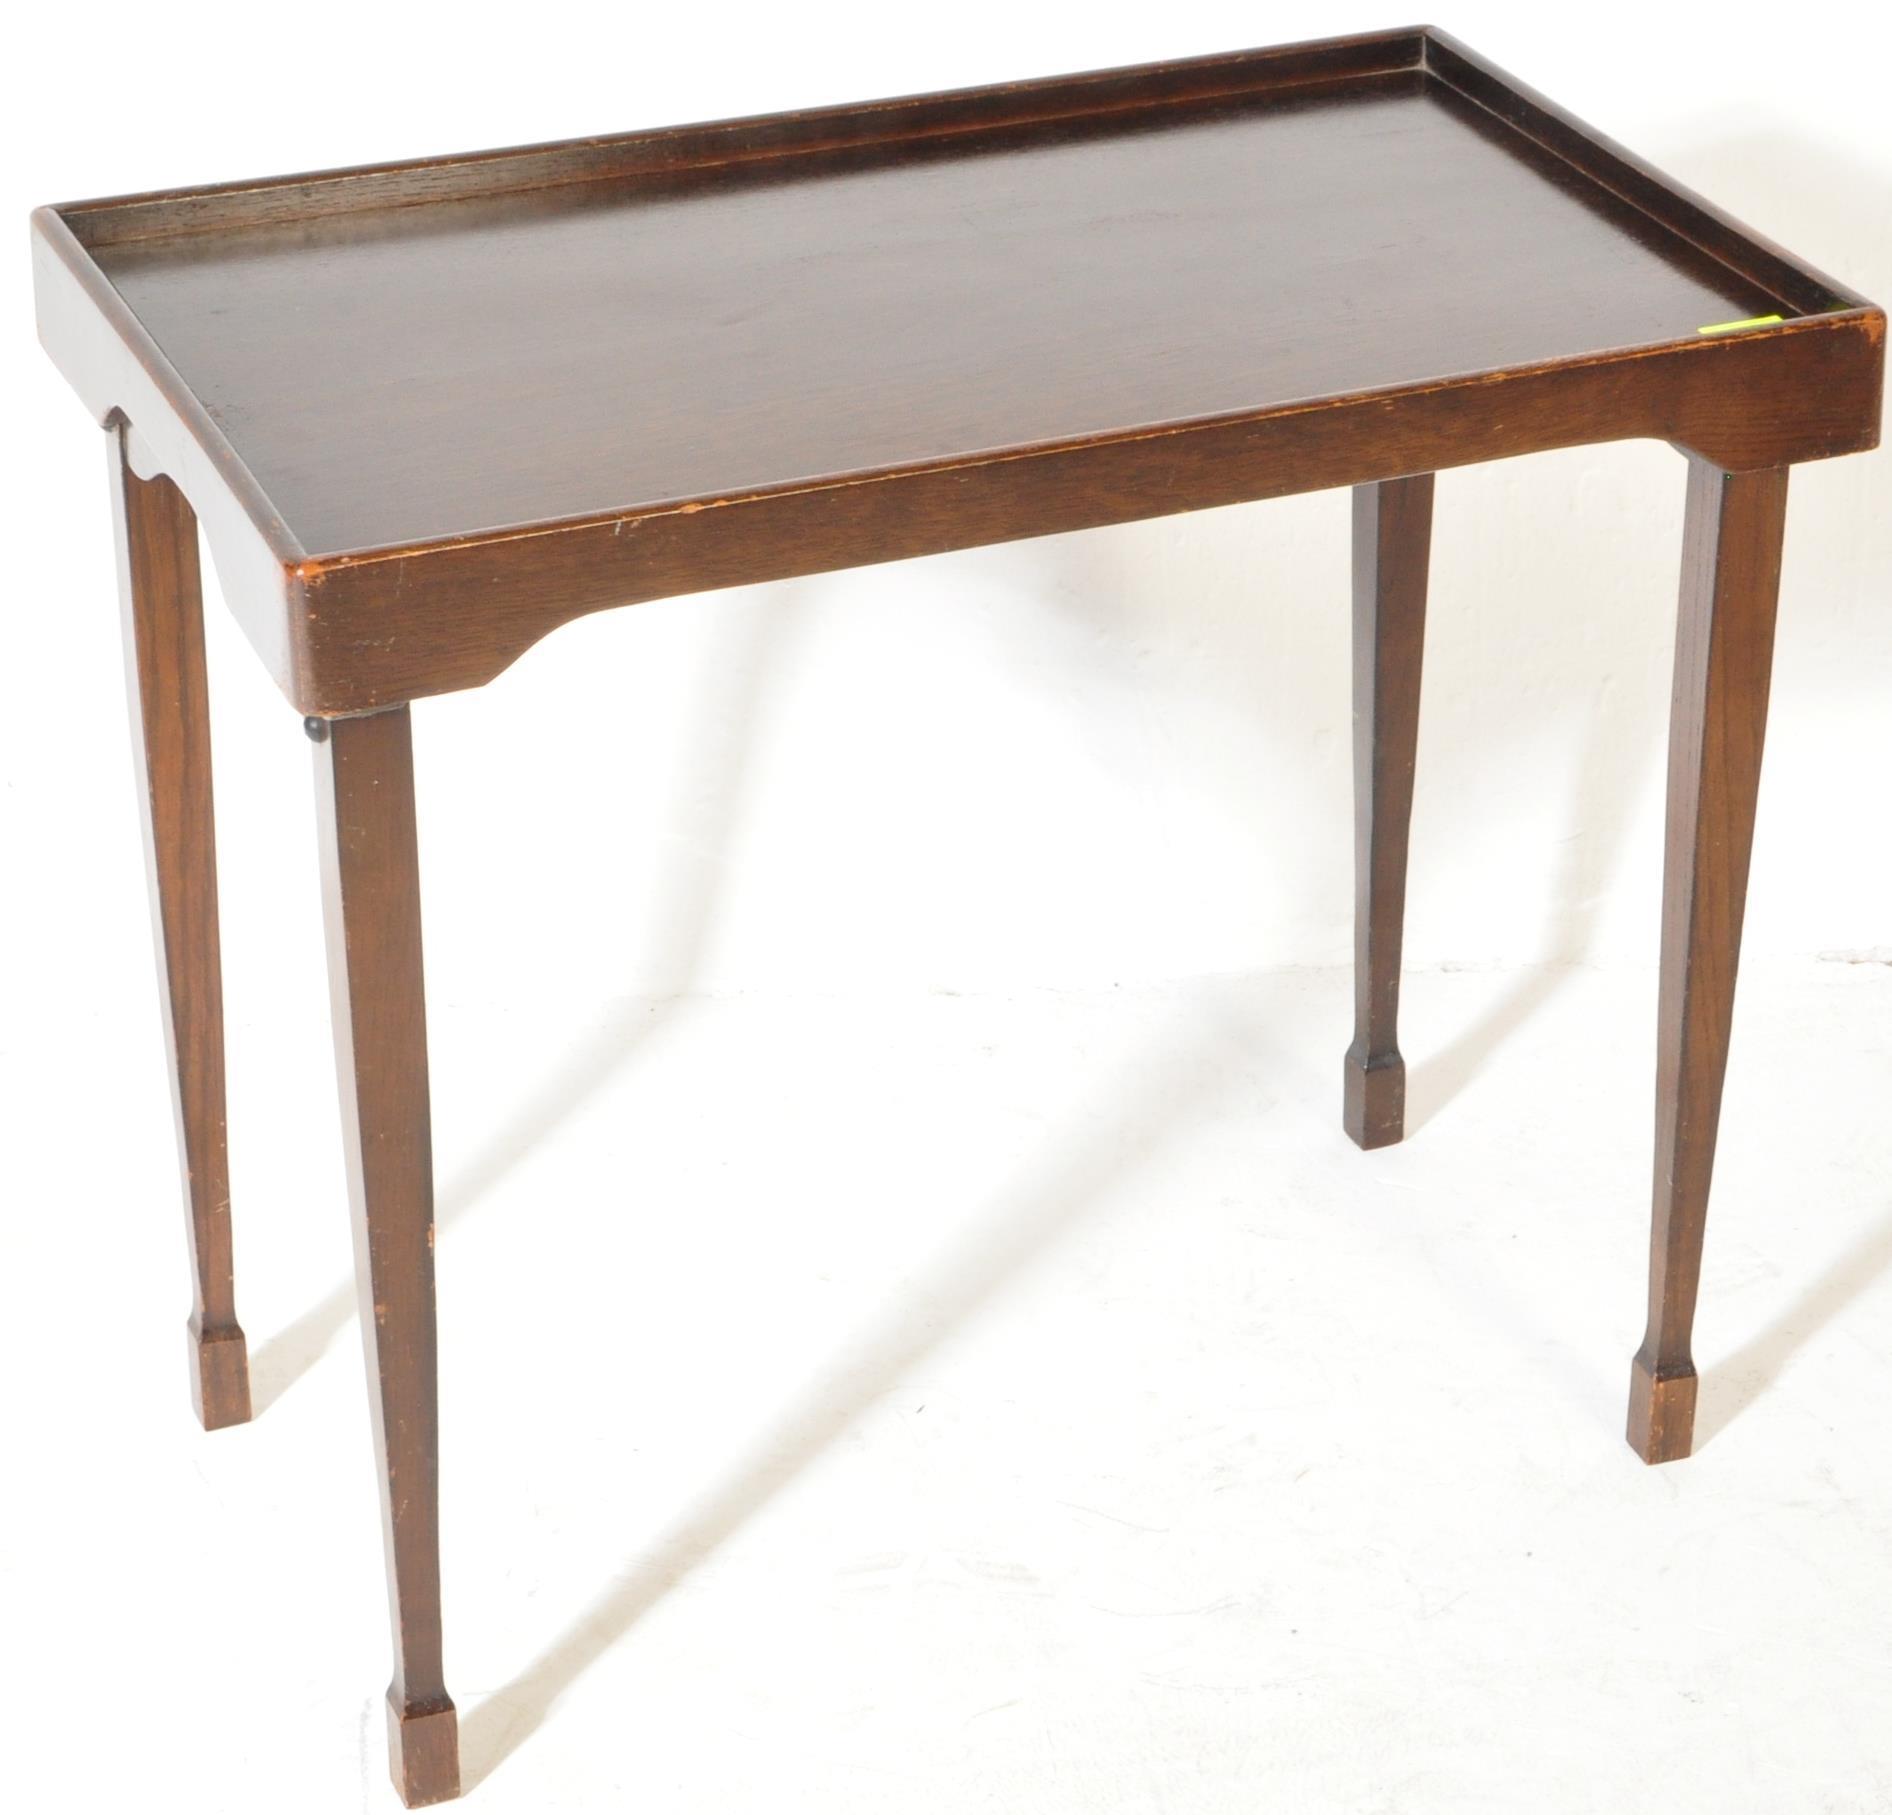 A 1940'S OAK FOLDING GALLERY TRAY TOP EDGE COACHING TABLE - Image 2 of 6